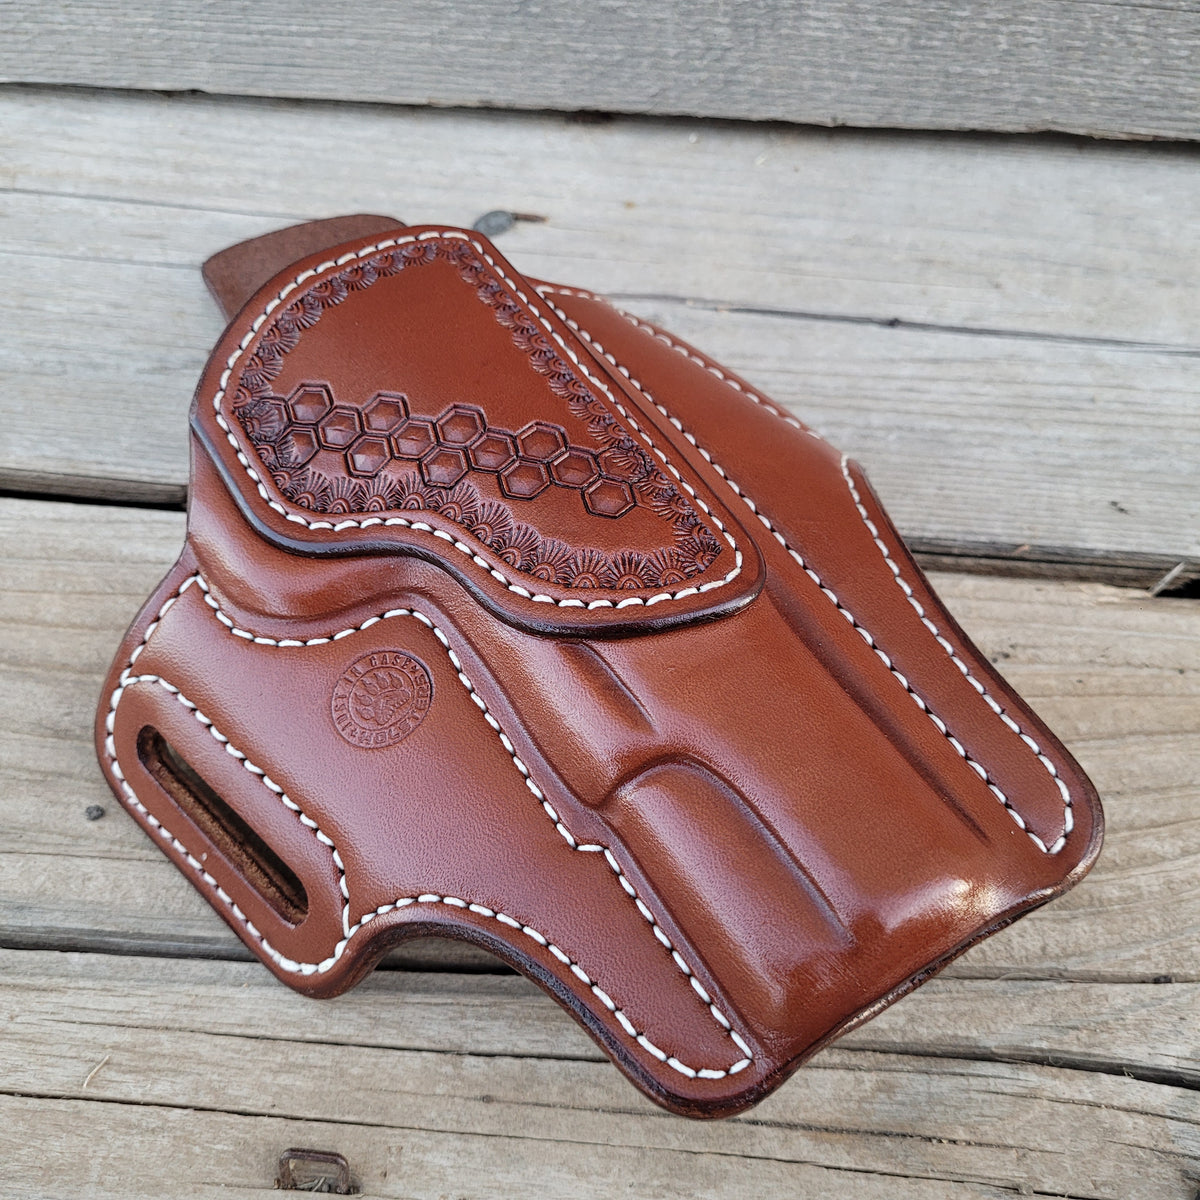 5" 1911 Classic Holster Brown White Stitching Partial Hex stamp